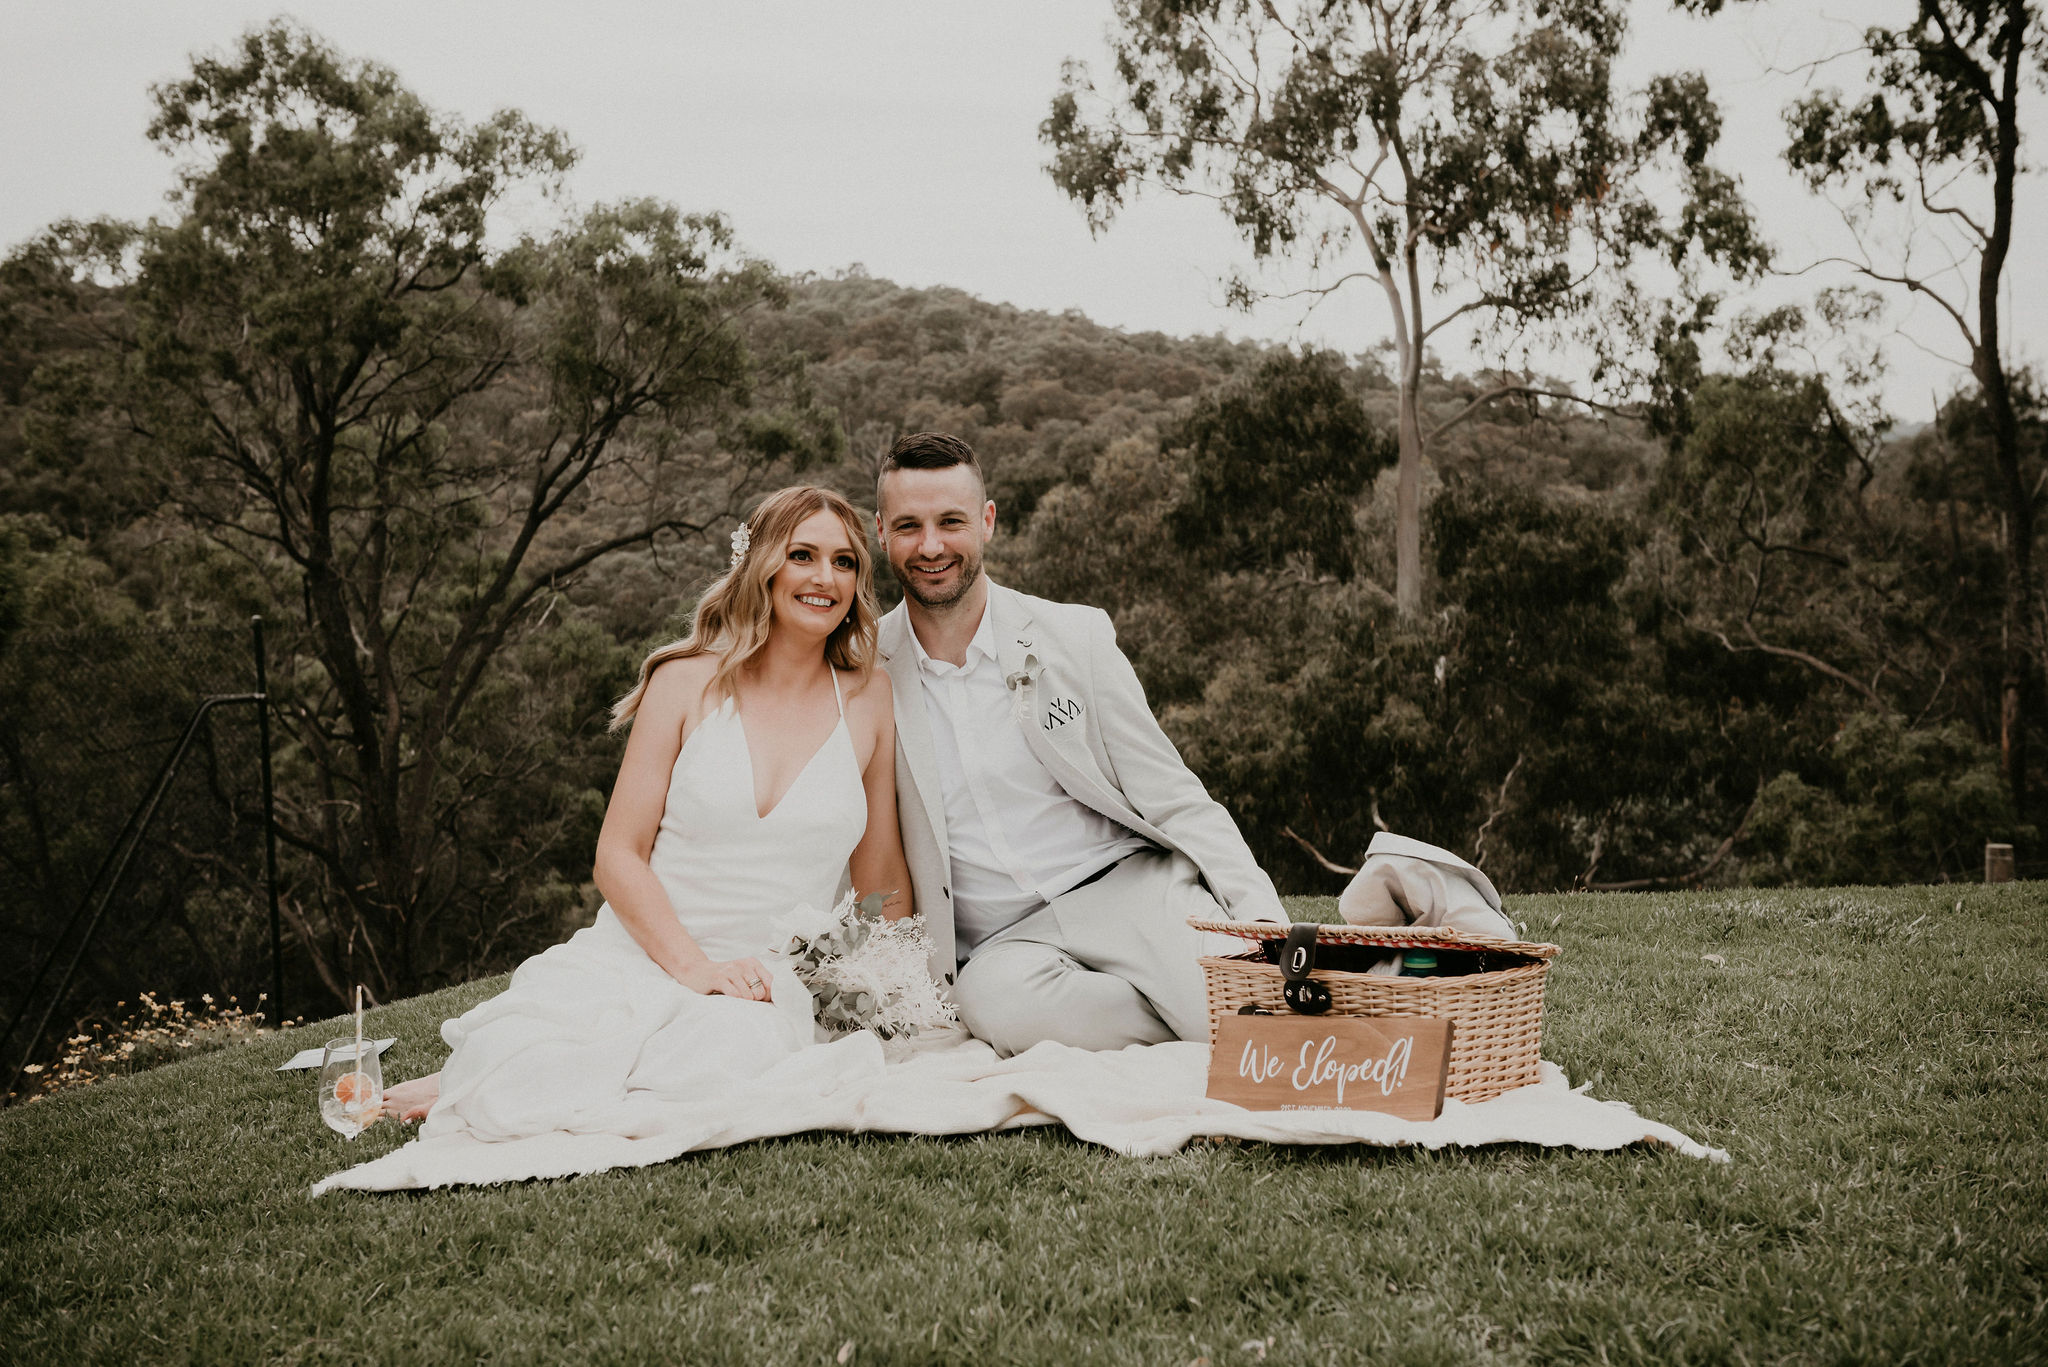 Lets-Elope-Melbourne-Celebrant-Photographer-Elopement-Package-Victoria-Sarah-Matler-Photography-Orchard-with-Kids-Farm-Vigano-weddings-intimate-19